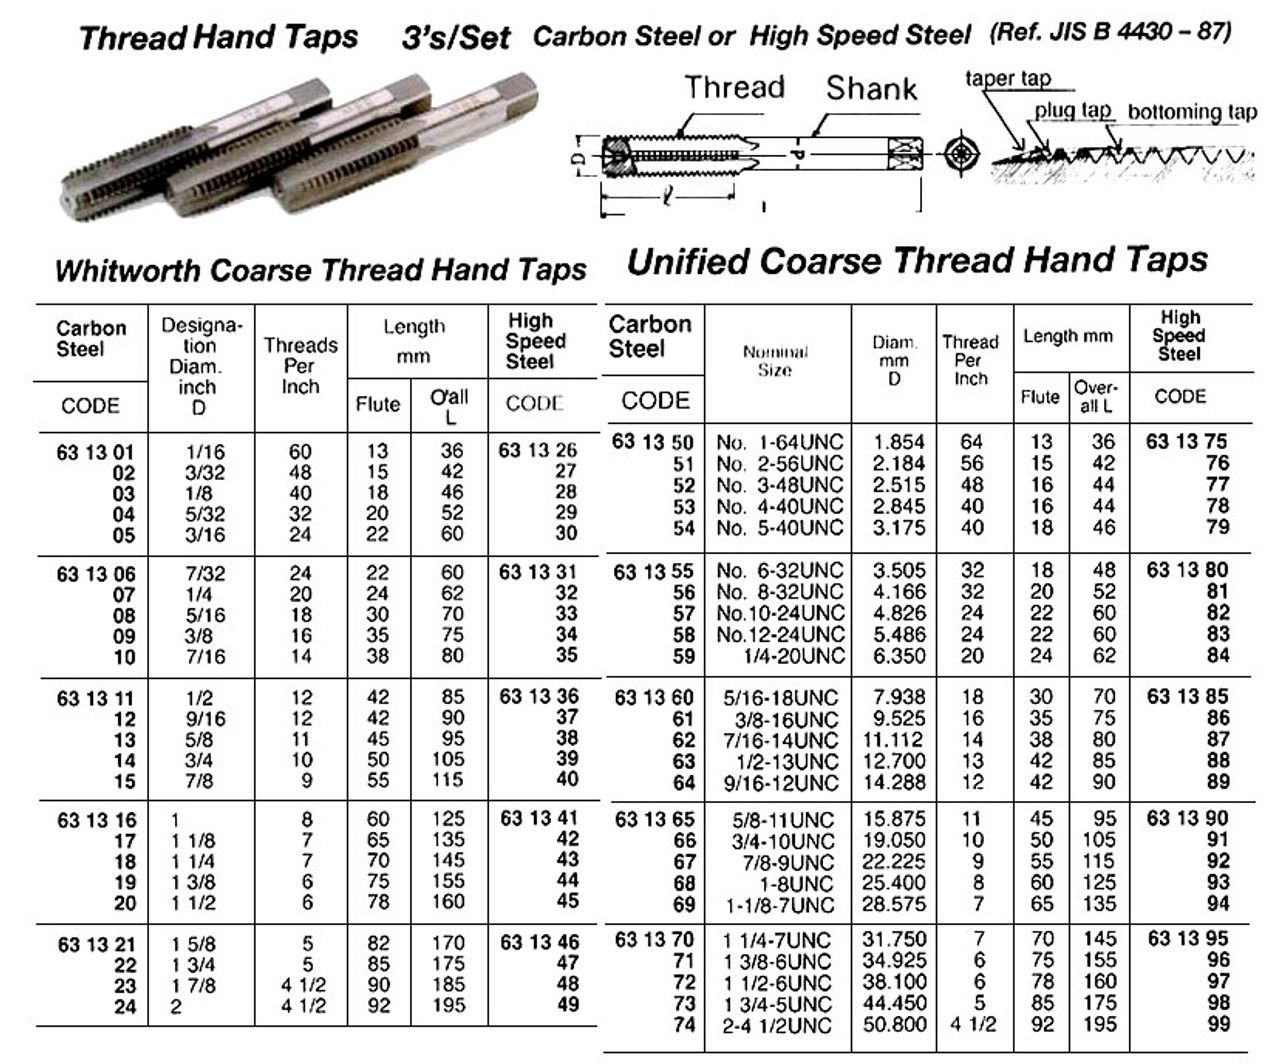 IMPA 631364 TAP HAND UNIFIED COARSE SKS 9/16-12UNC 3'S